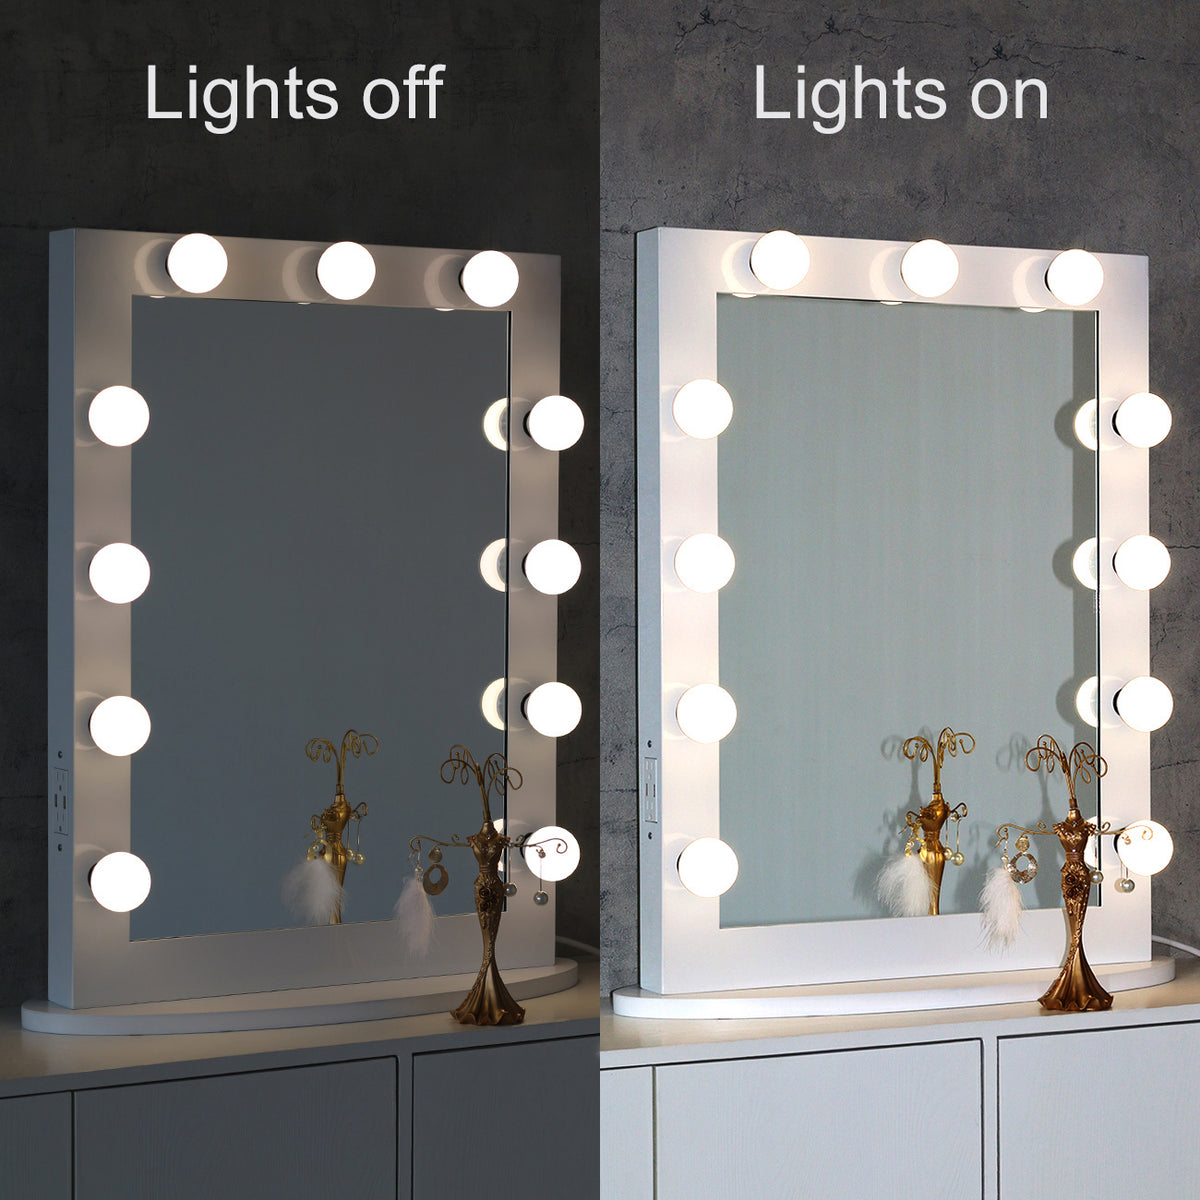 Black Toyswill Hollywood Style Vanity Mirror with 2 Outlets and USB Ports,Tabletop or Wall Mounted Lighted Makeup Mirror,Free Dimmable LED Bulbs